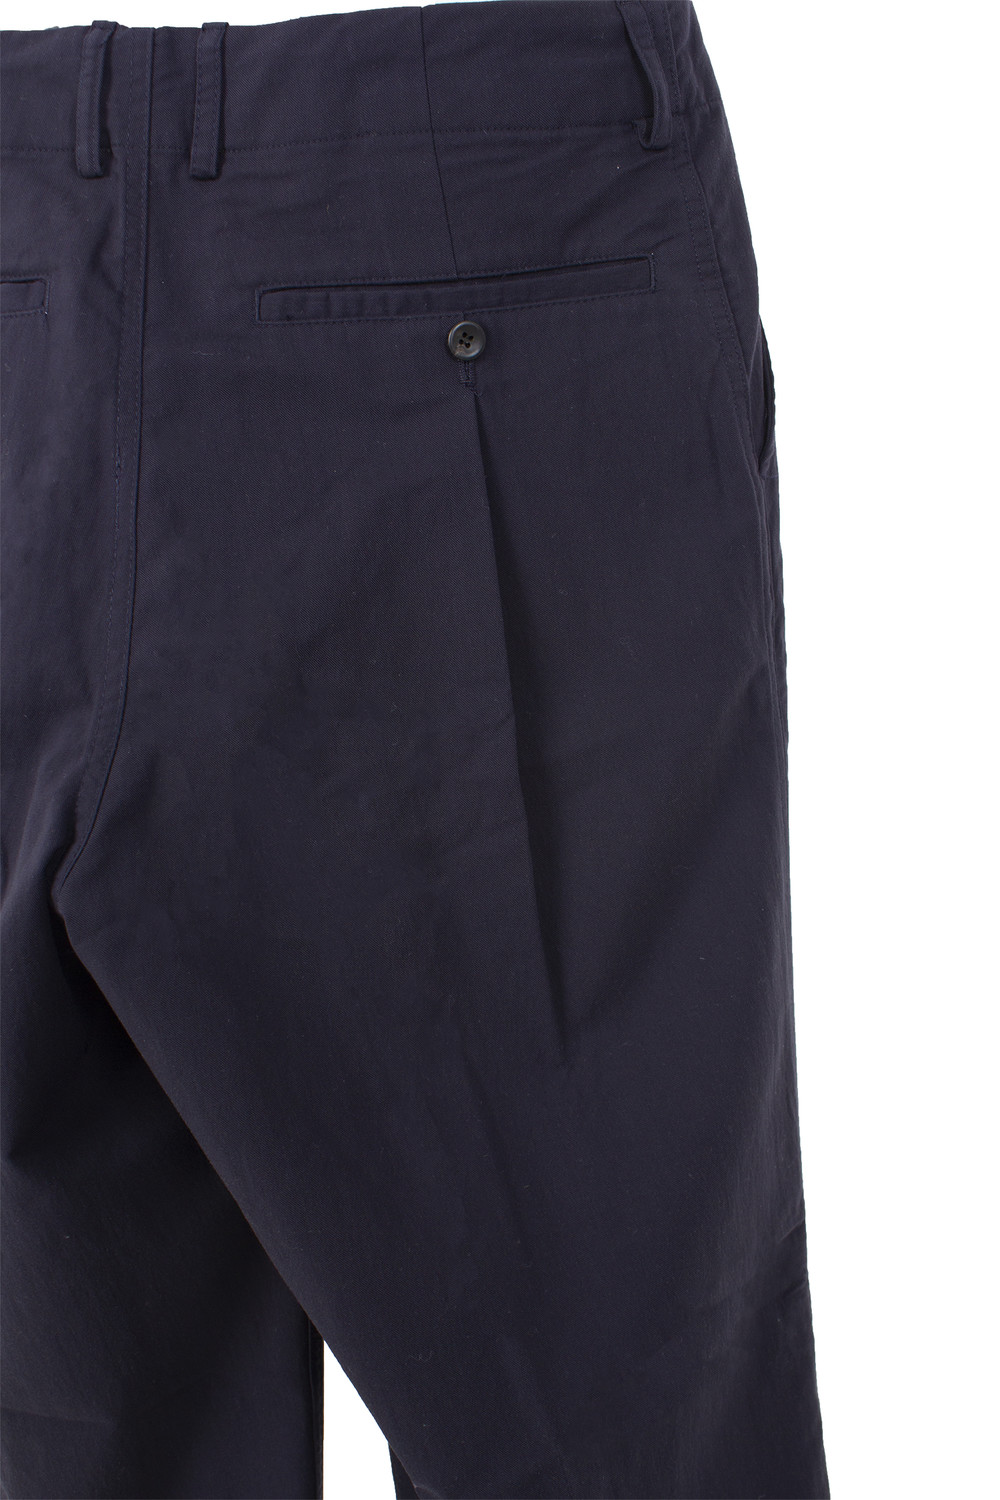 NAVY TUCKED TROUSERS